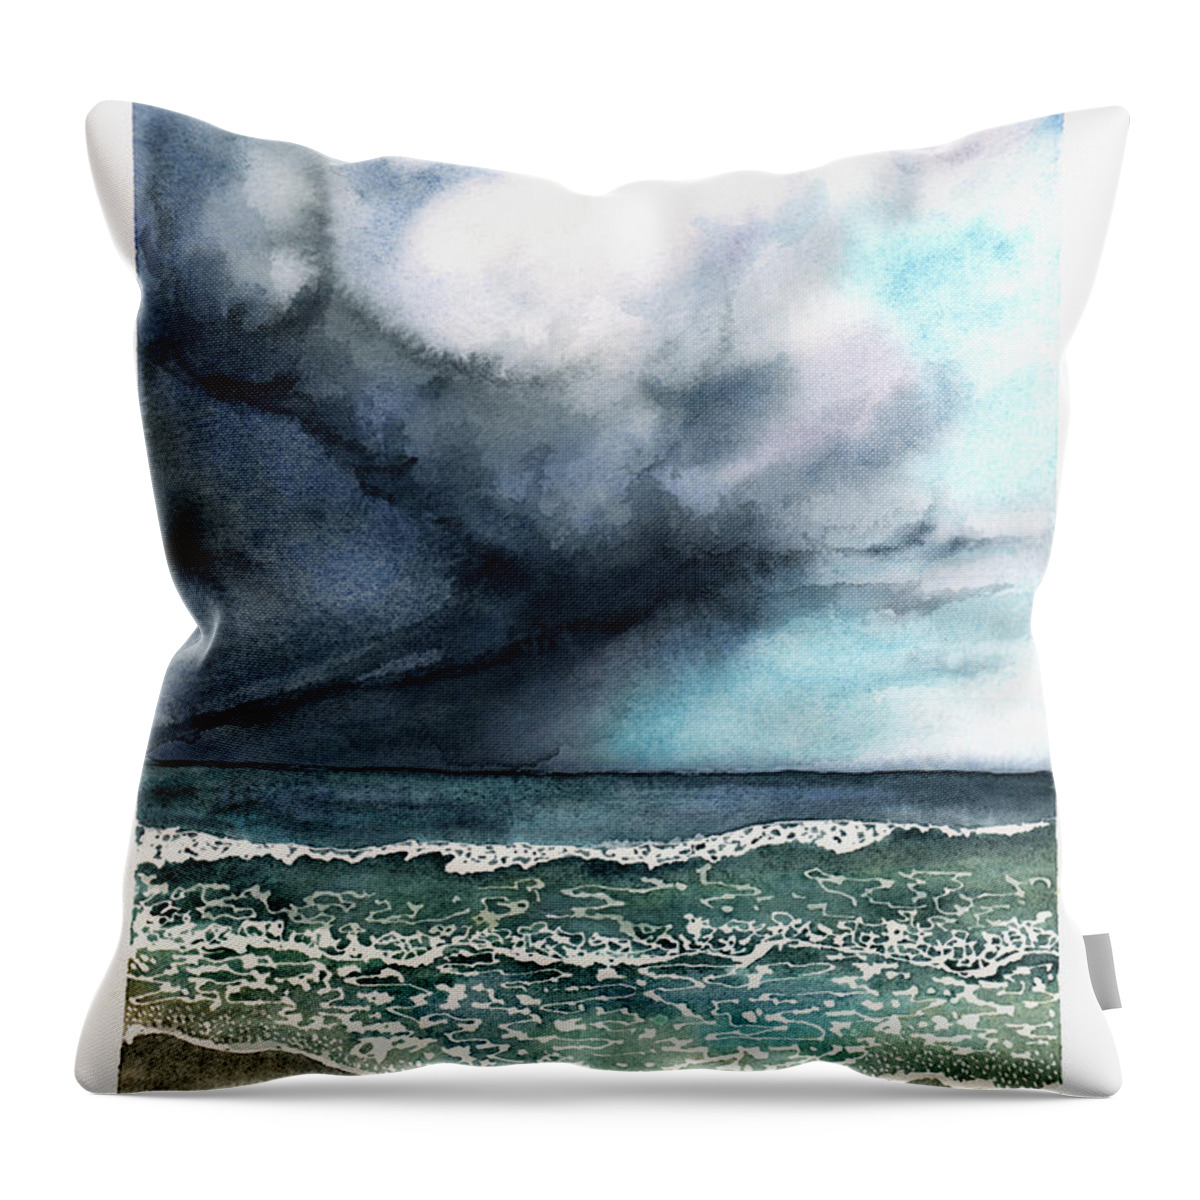 Storm Throw Pillow featuring the painting The Looming Storm by Hilda Wagner